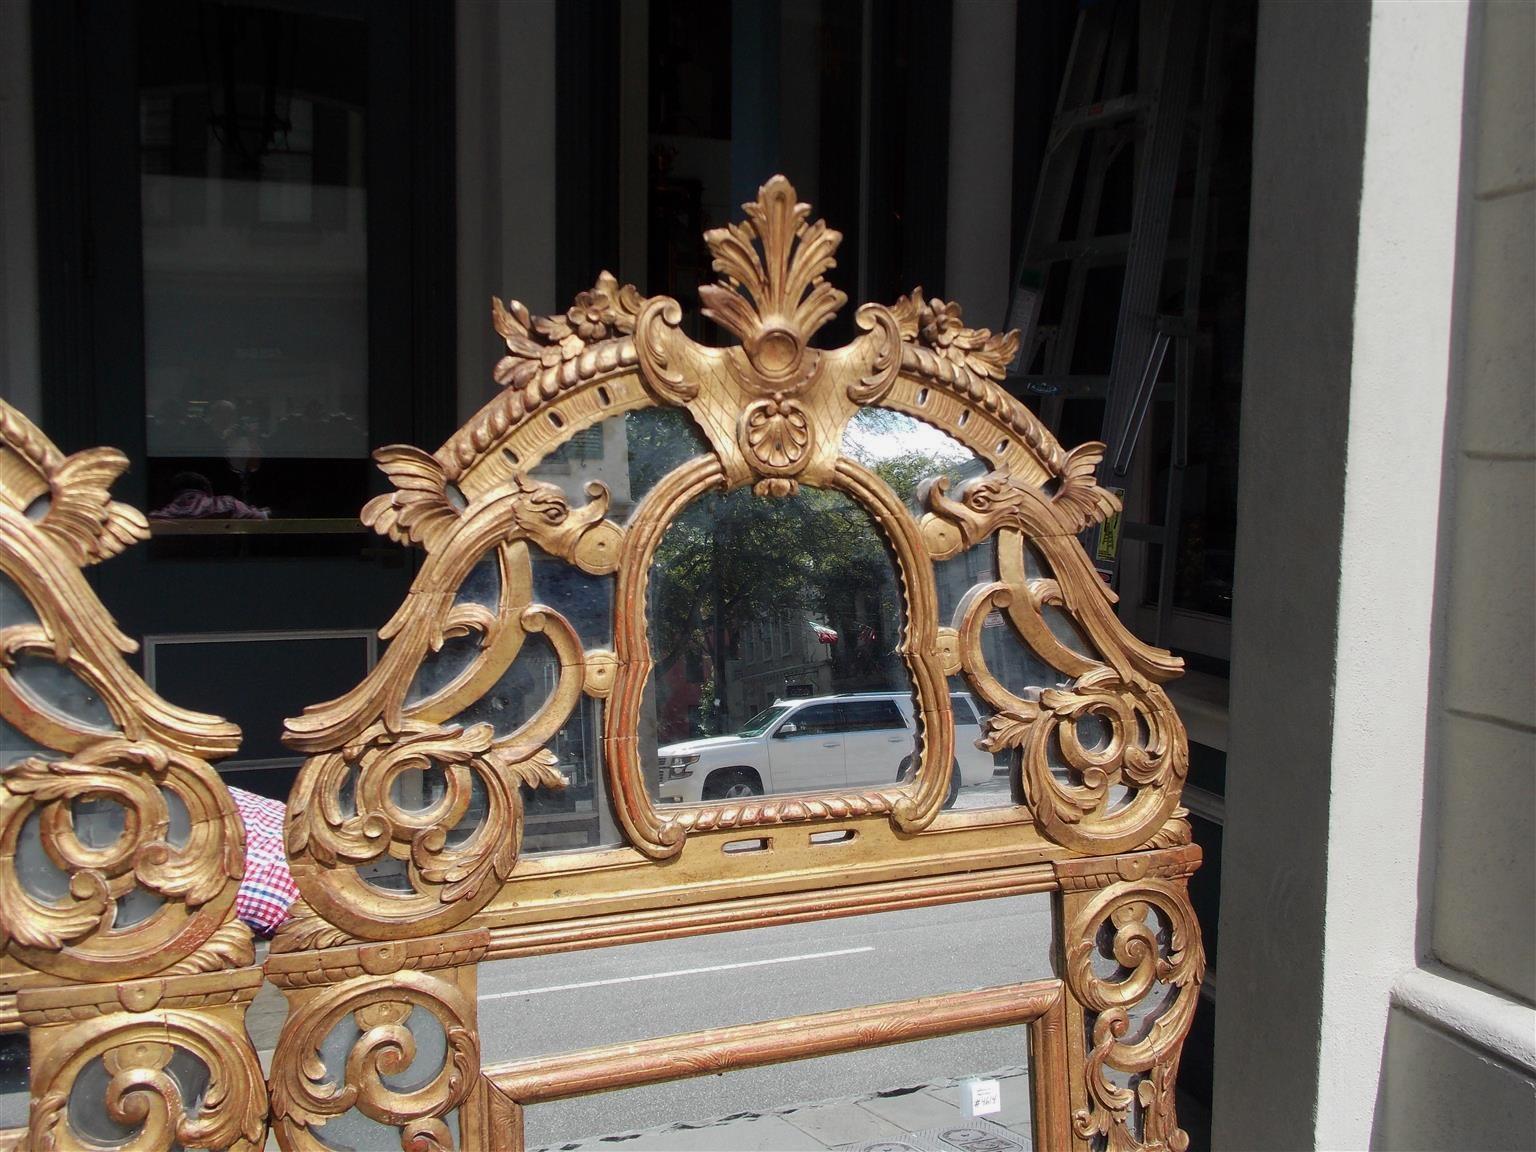 Glass Pair of Italian Neoclassical Gilt Carved Wood Foliage Crest Mirrors, Circa 1810